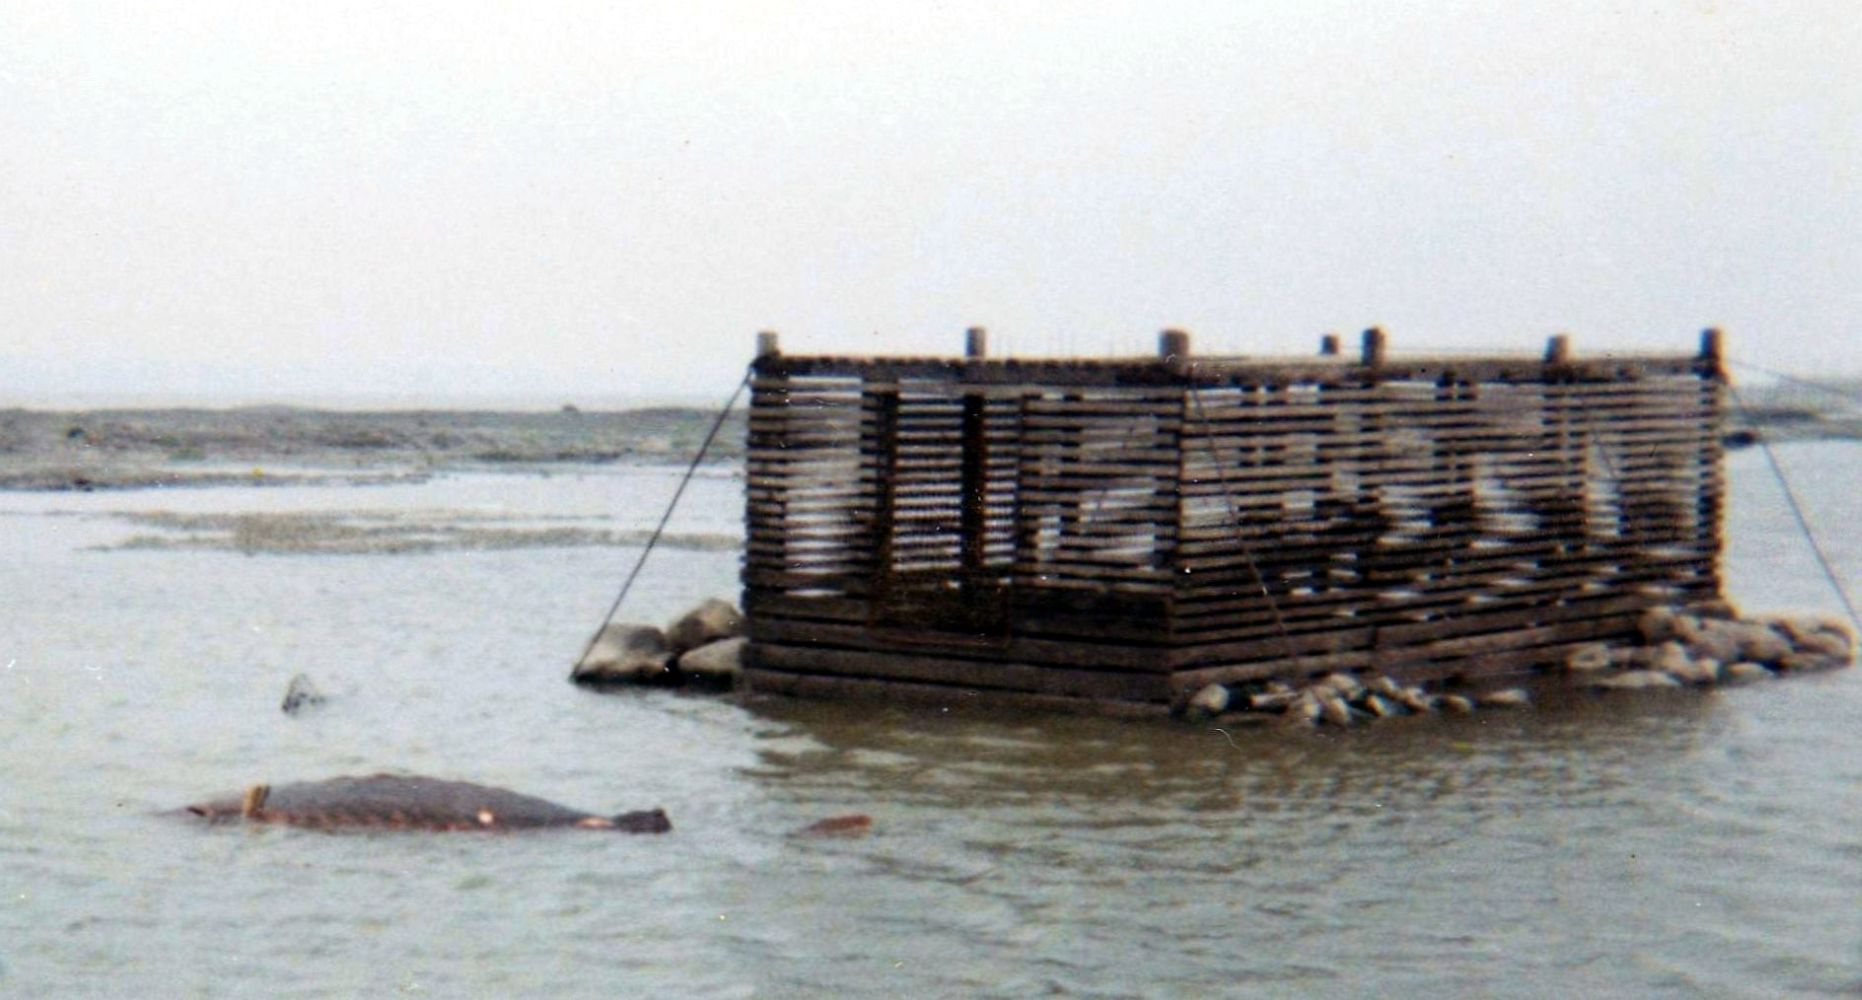 Wooden trap made of narrow horizontal planks. It measures 2.4 m wide by 4.8 m long and 1.8 m high. It is anchored to the sea floor by cables and reinforced by large stones at the base.